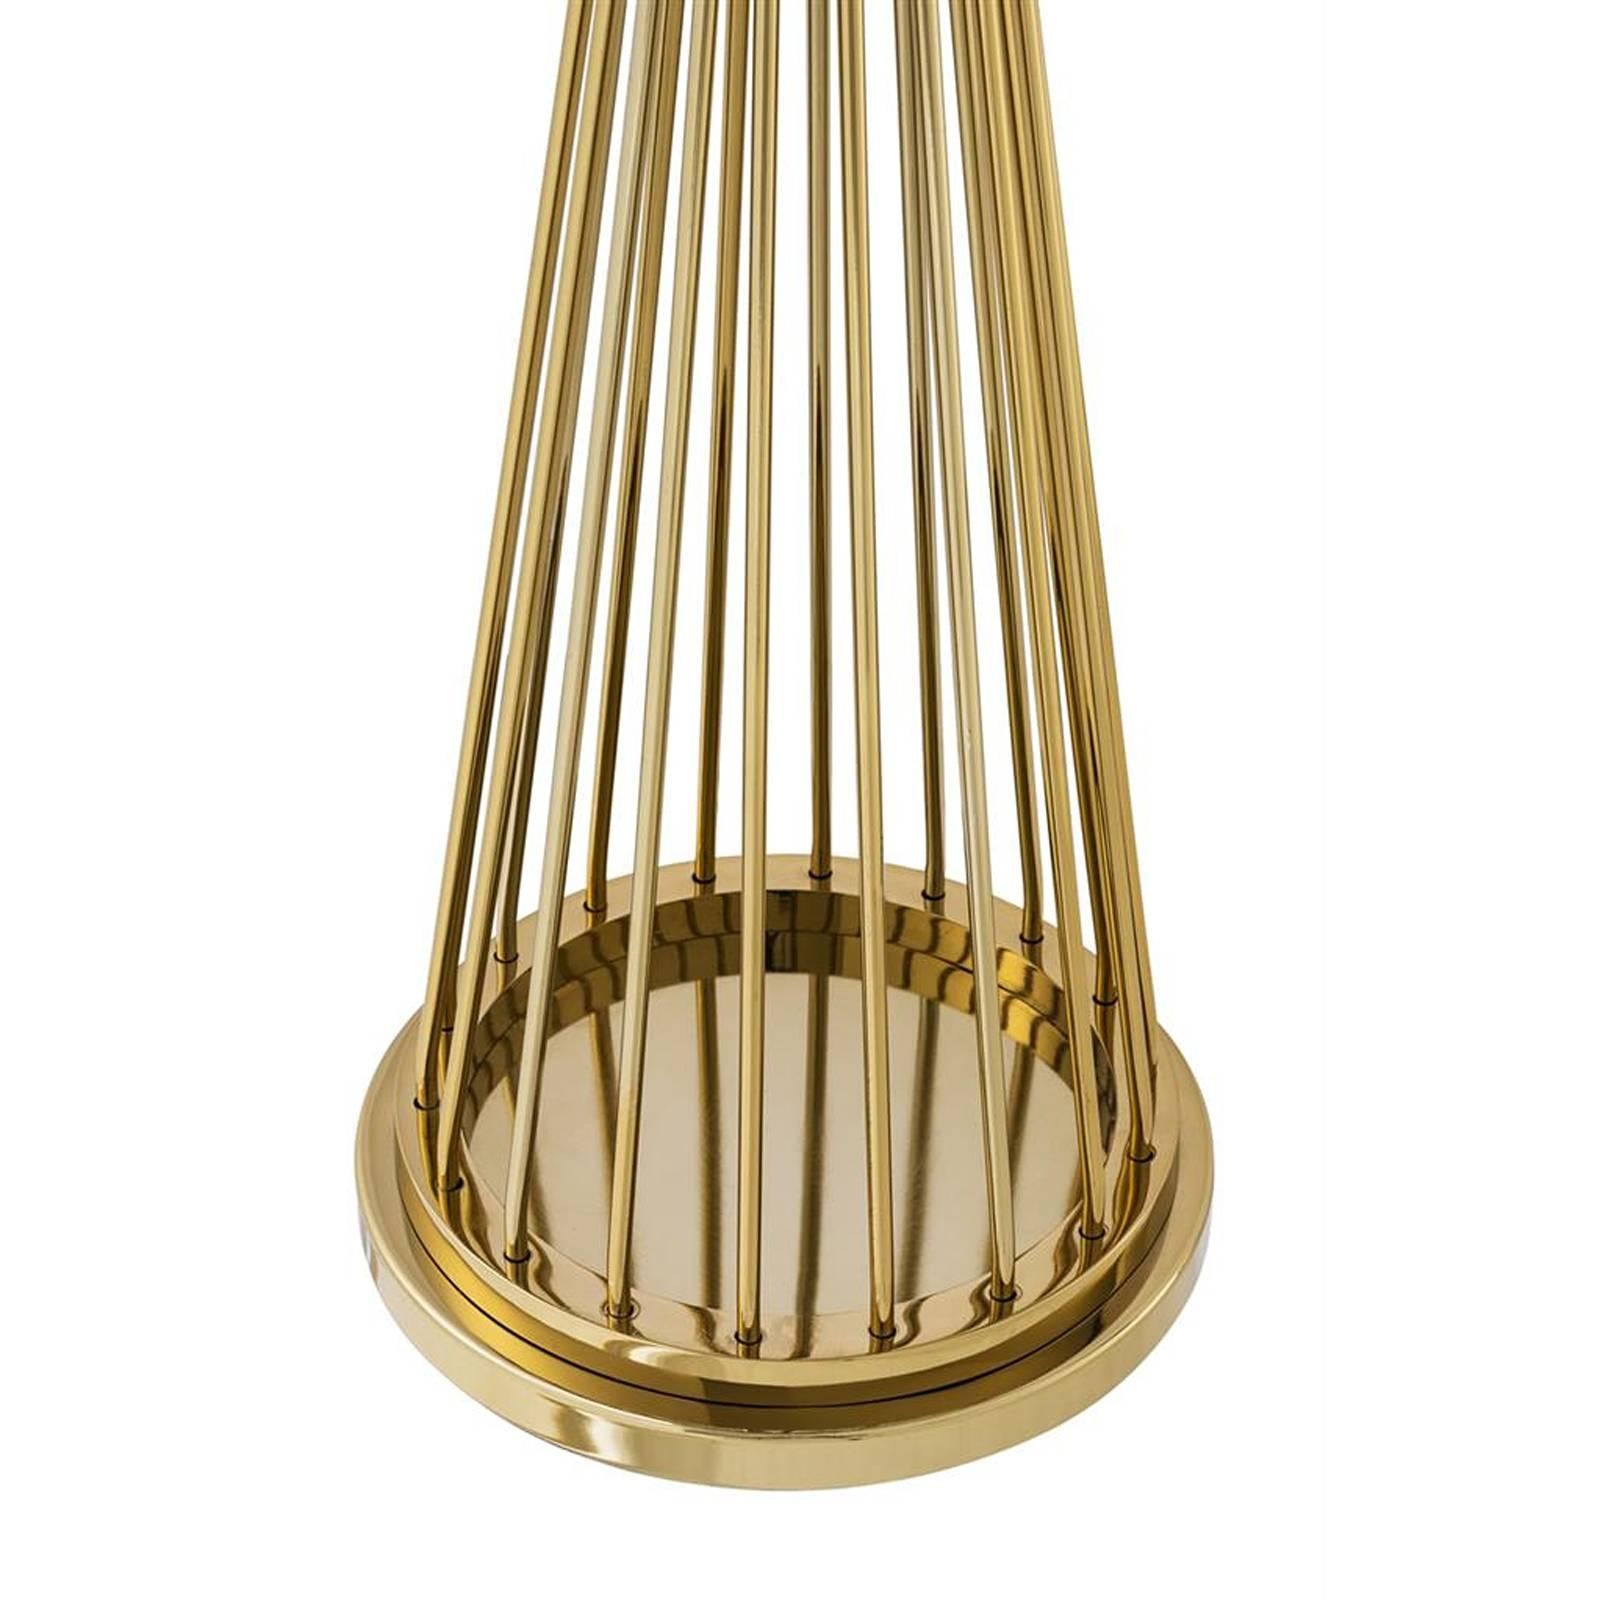 Polished Barnet Floor Lamp in Gold or Nickel Finish